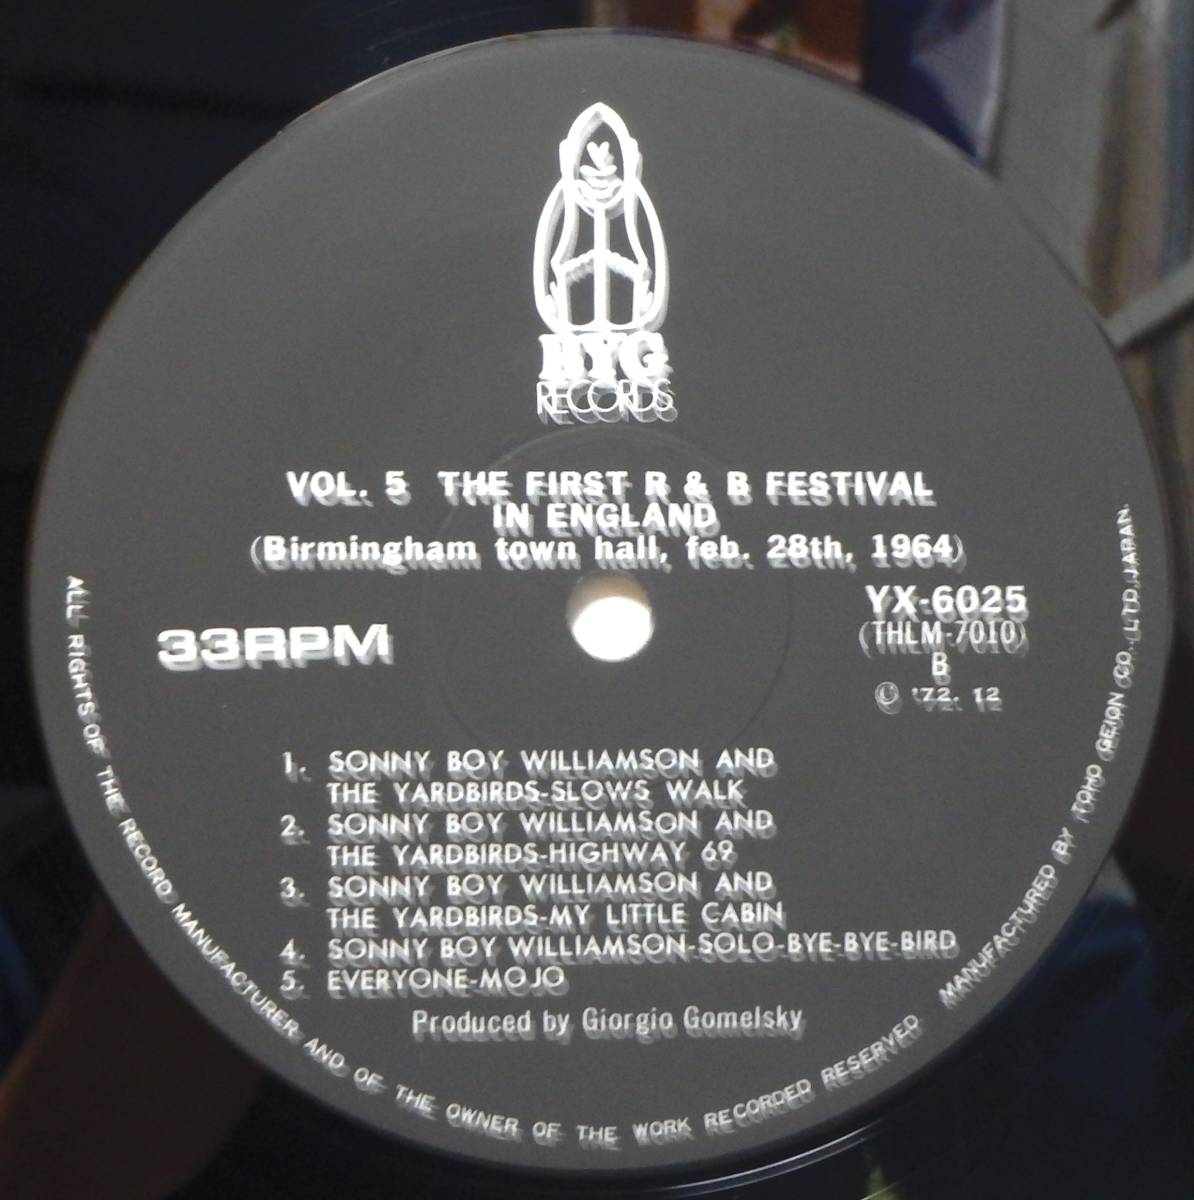 【VPS124】V.A.「Faces And Places Vol.5 - The First R&B Festival In England (バーミンガム・タウン・ホール)」, 72 JPN 初回盤_画像5